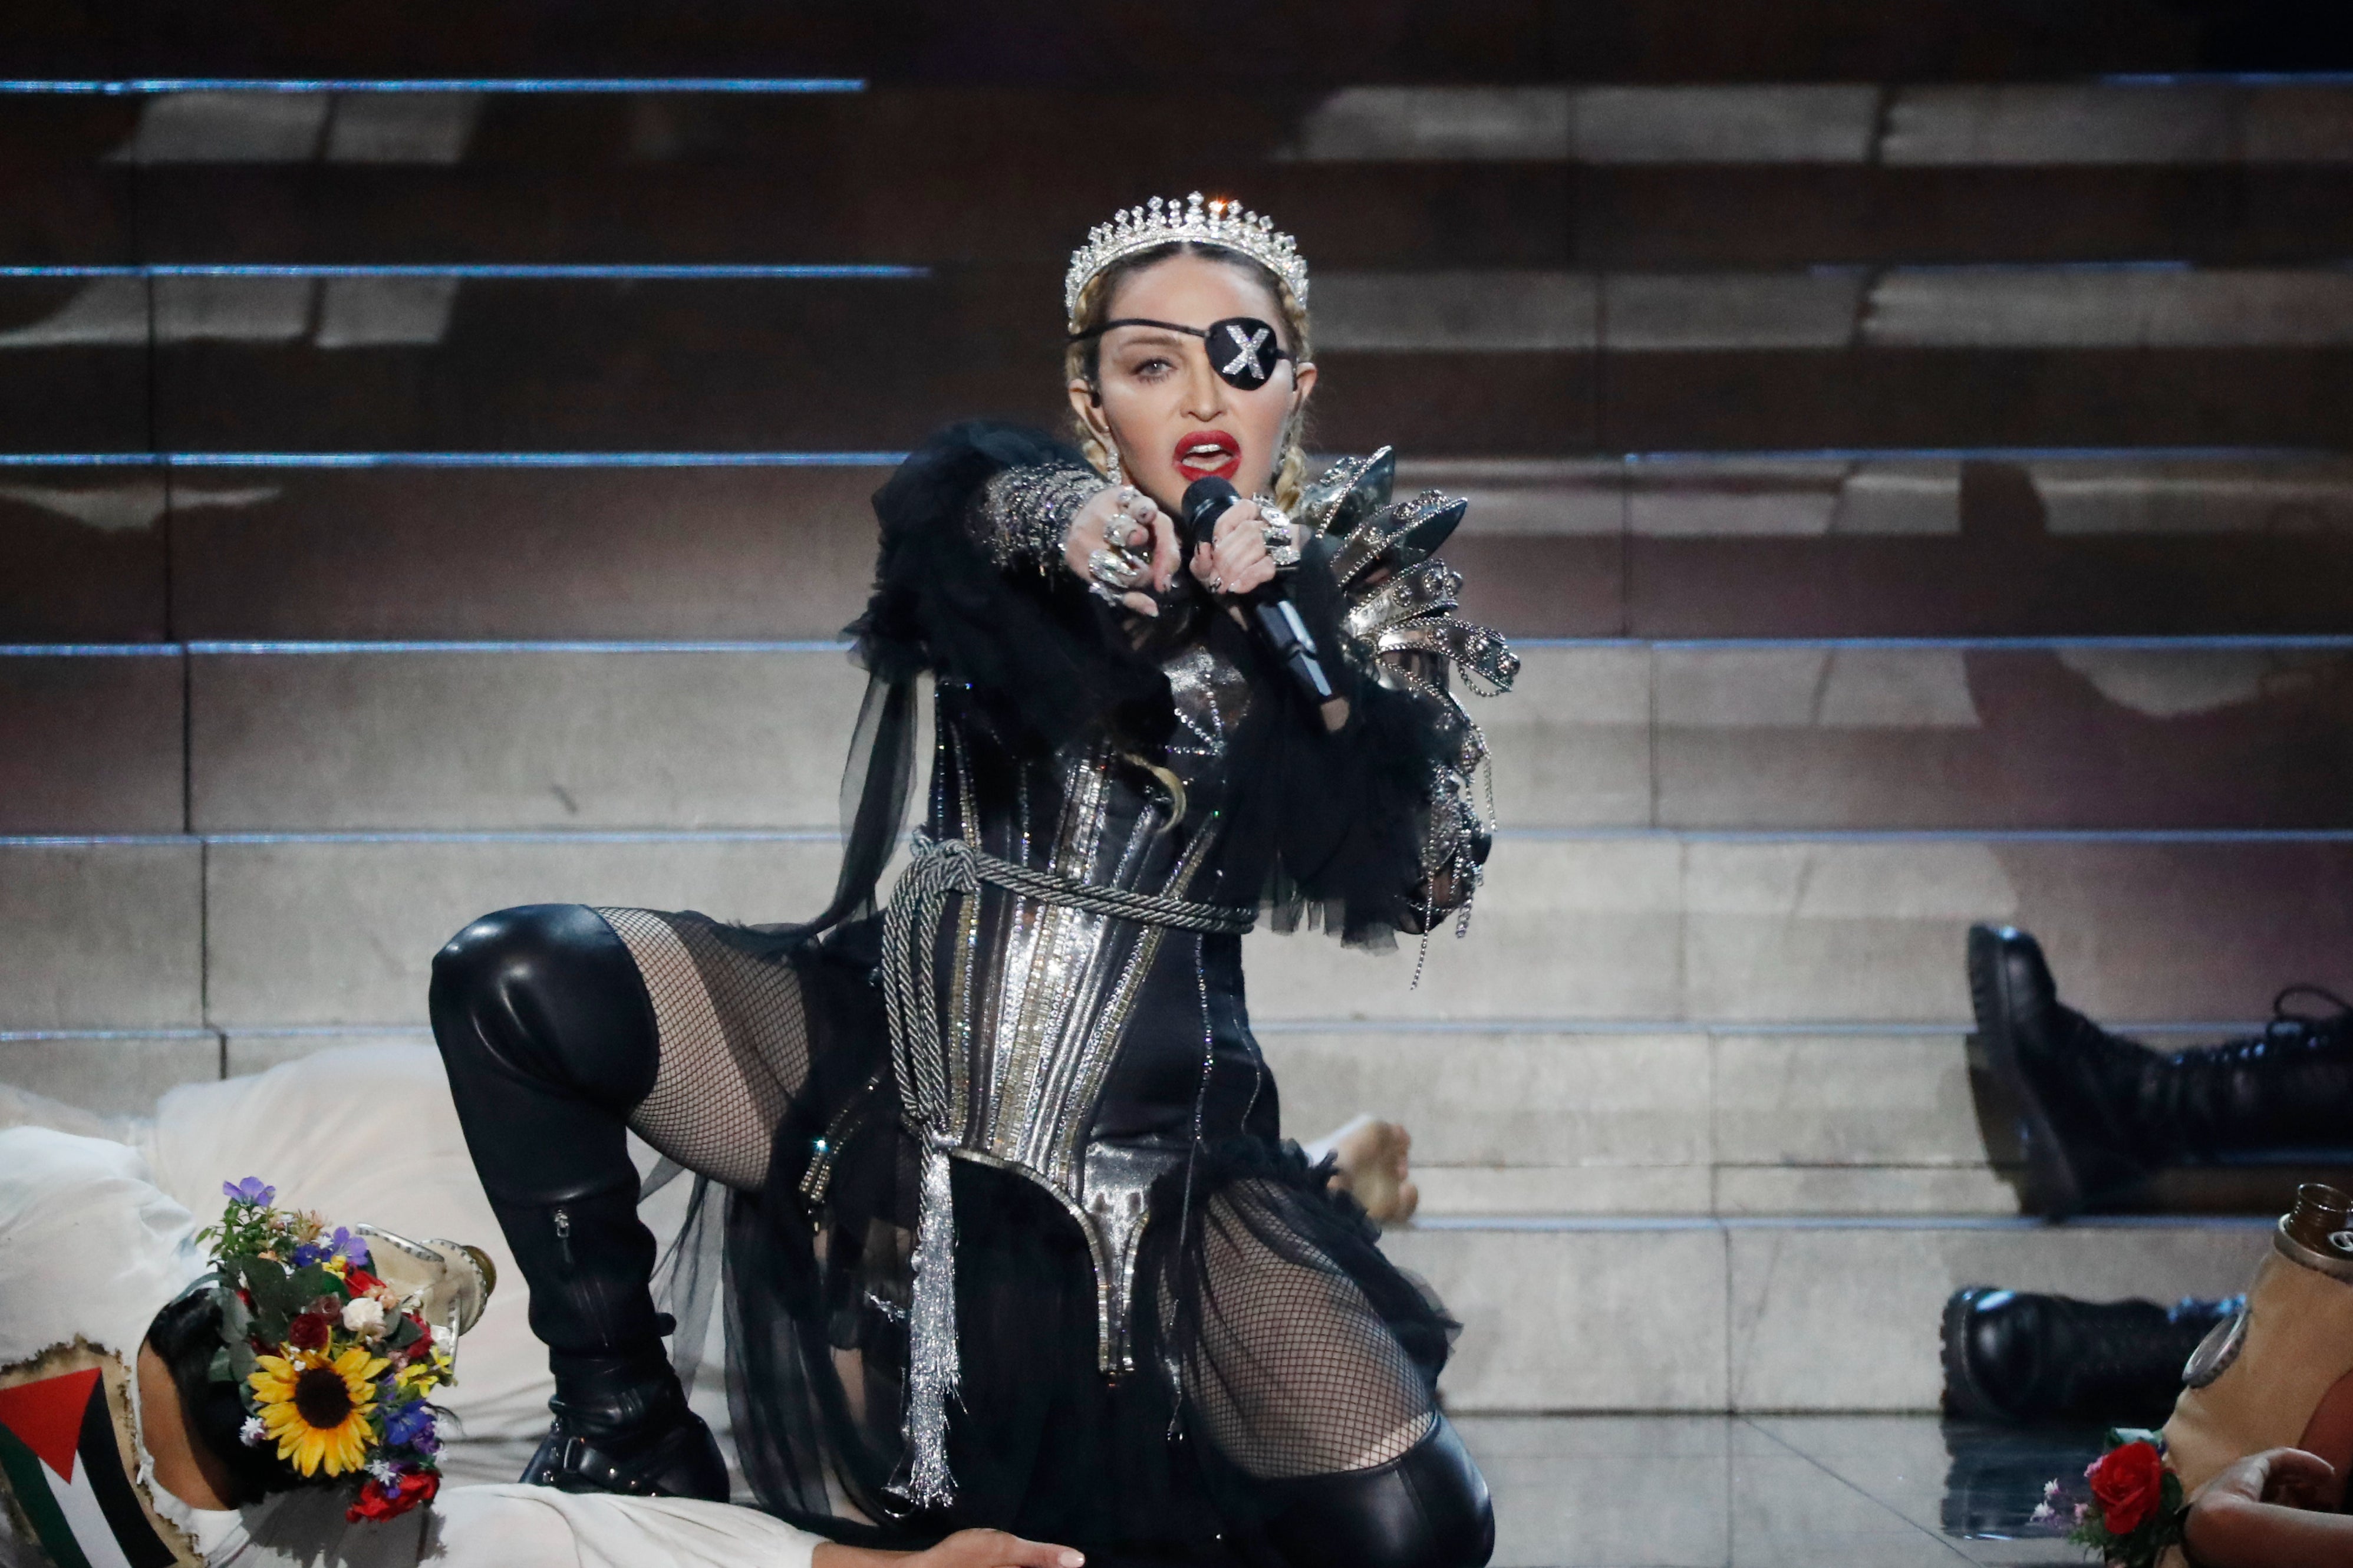 Madonna performing at the Eurovision Song Contest in 2019